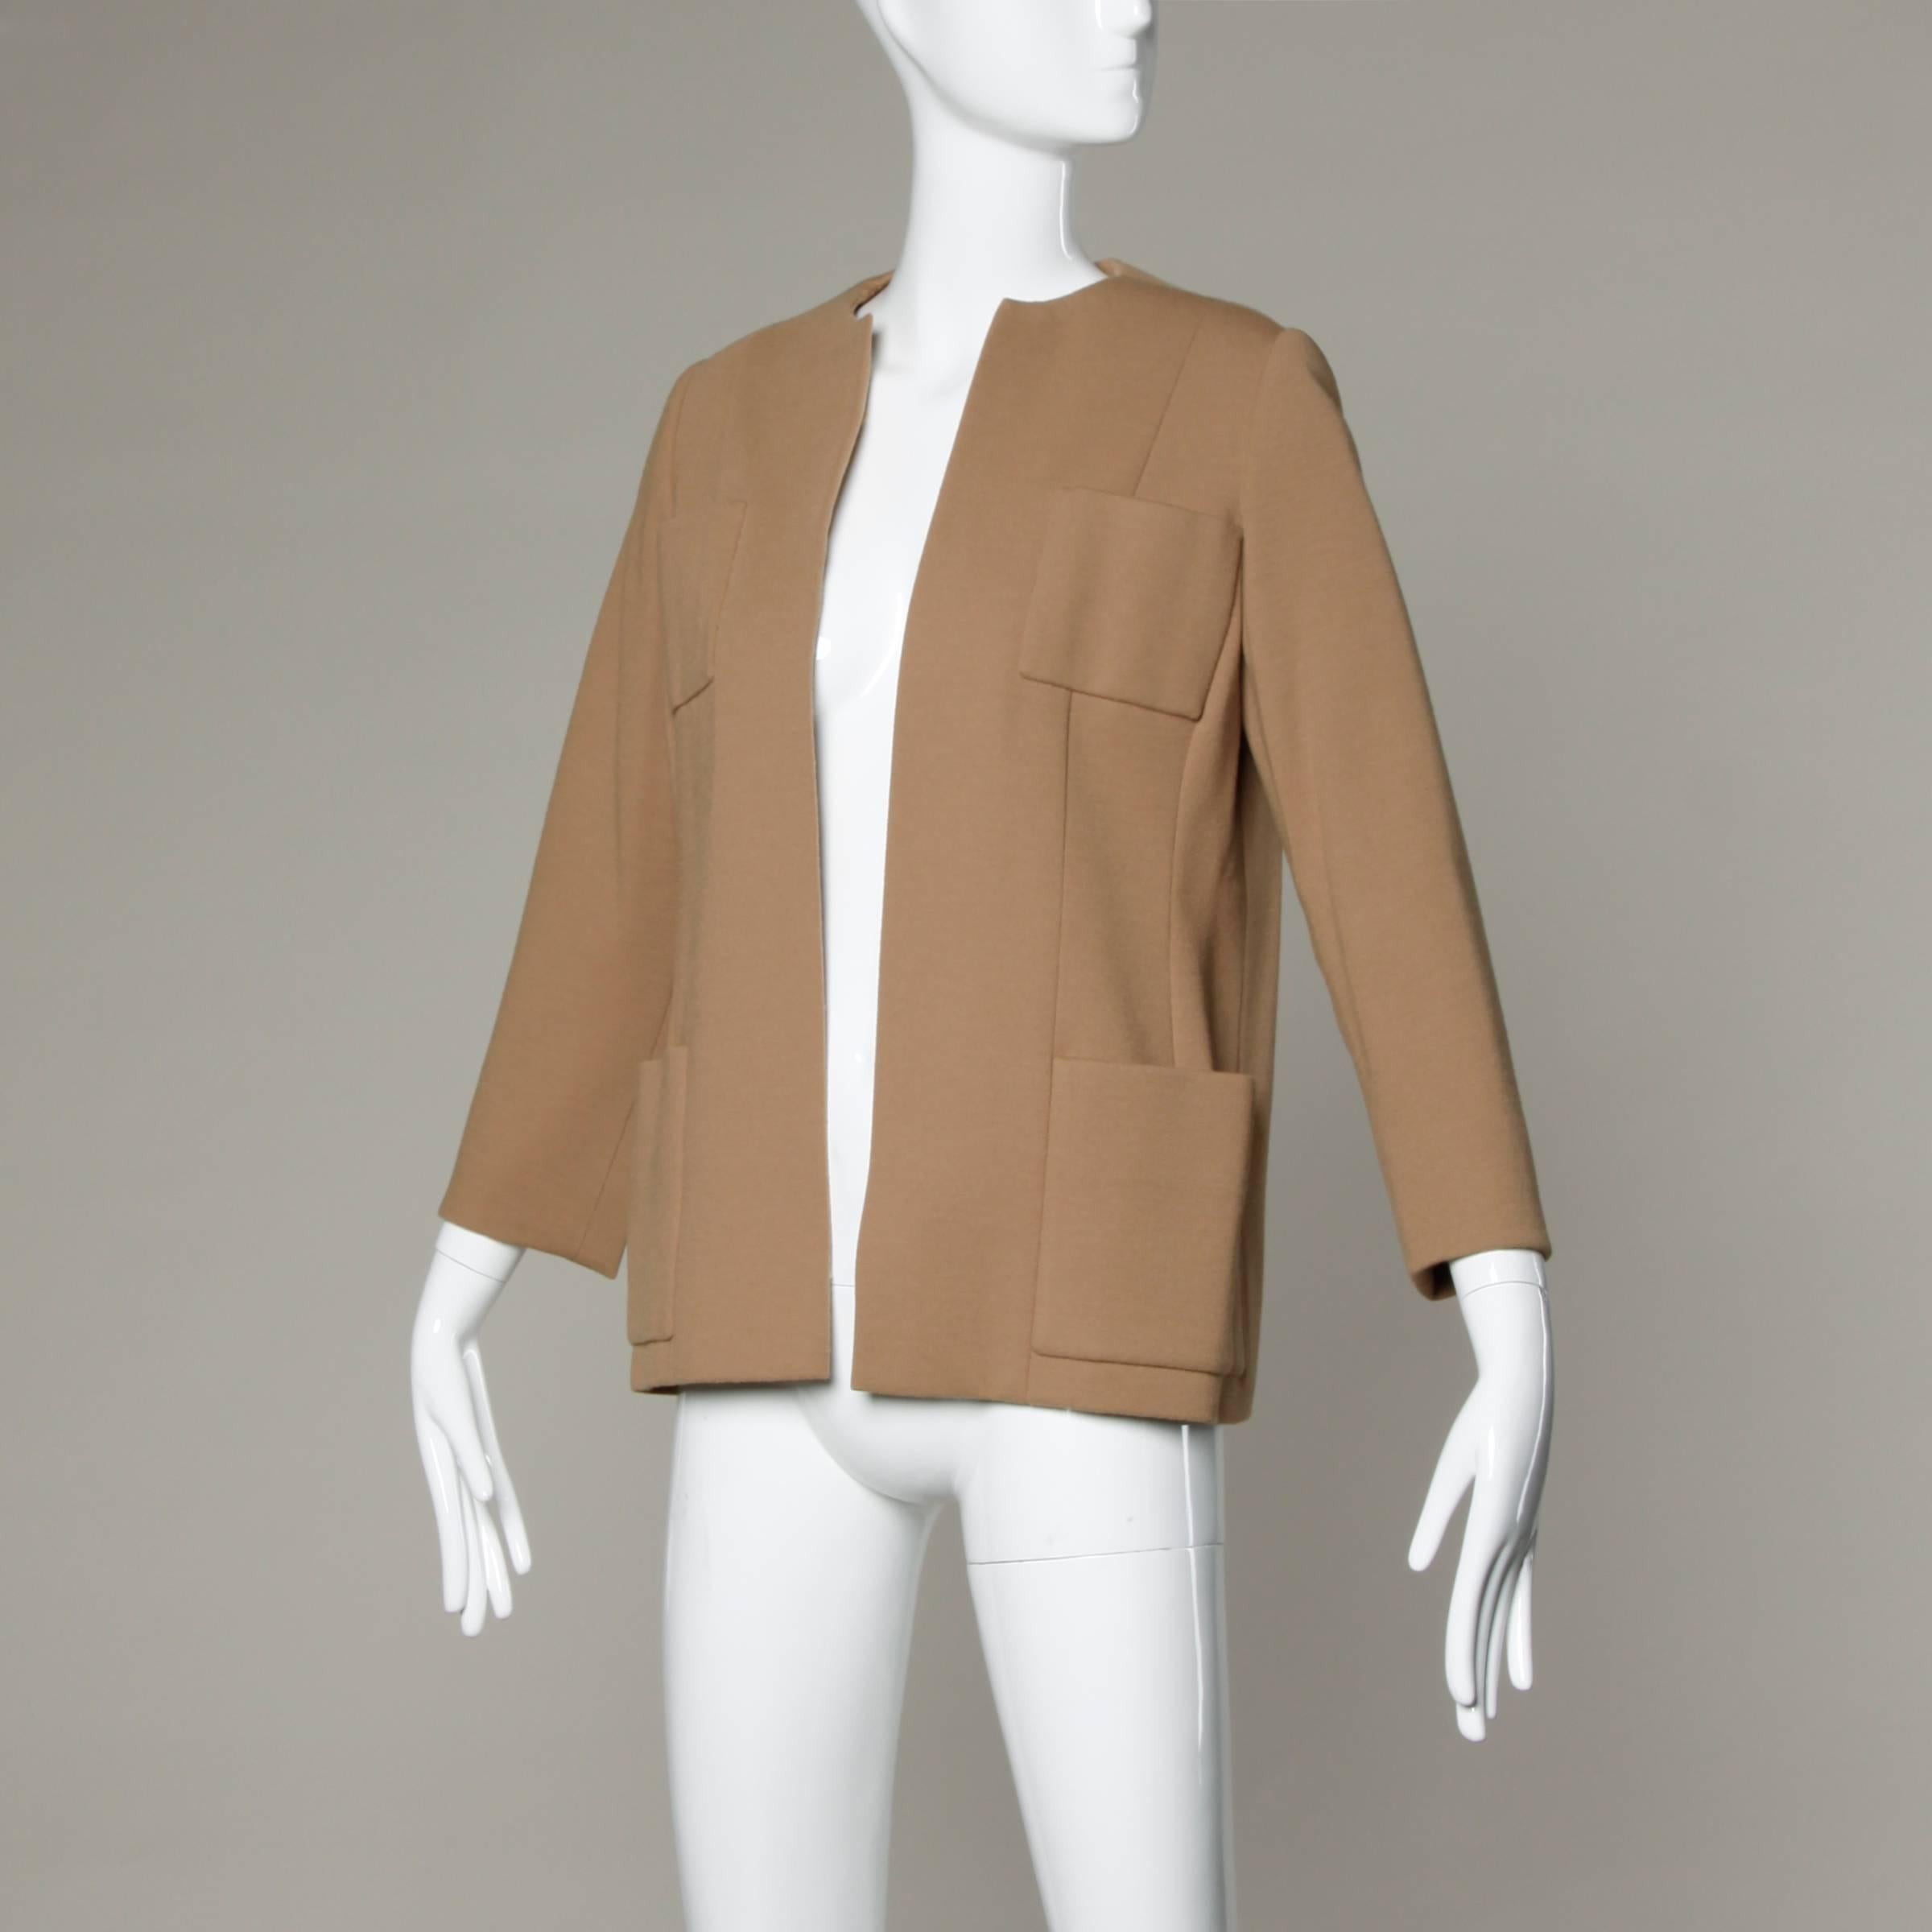 Norman Norell 1960s Vintage Camel Silk + Wool Tailored Jacket For Sale 1